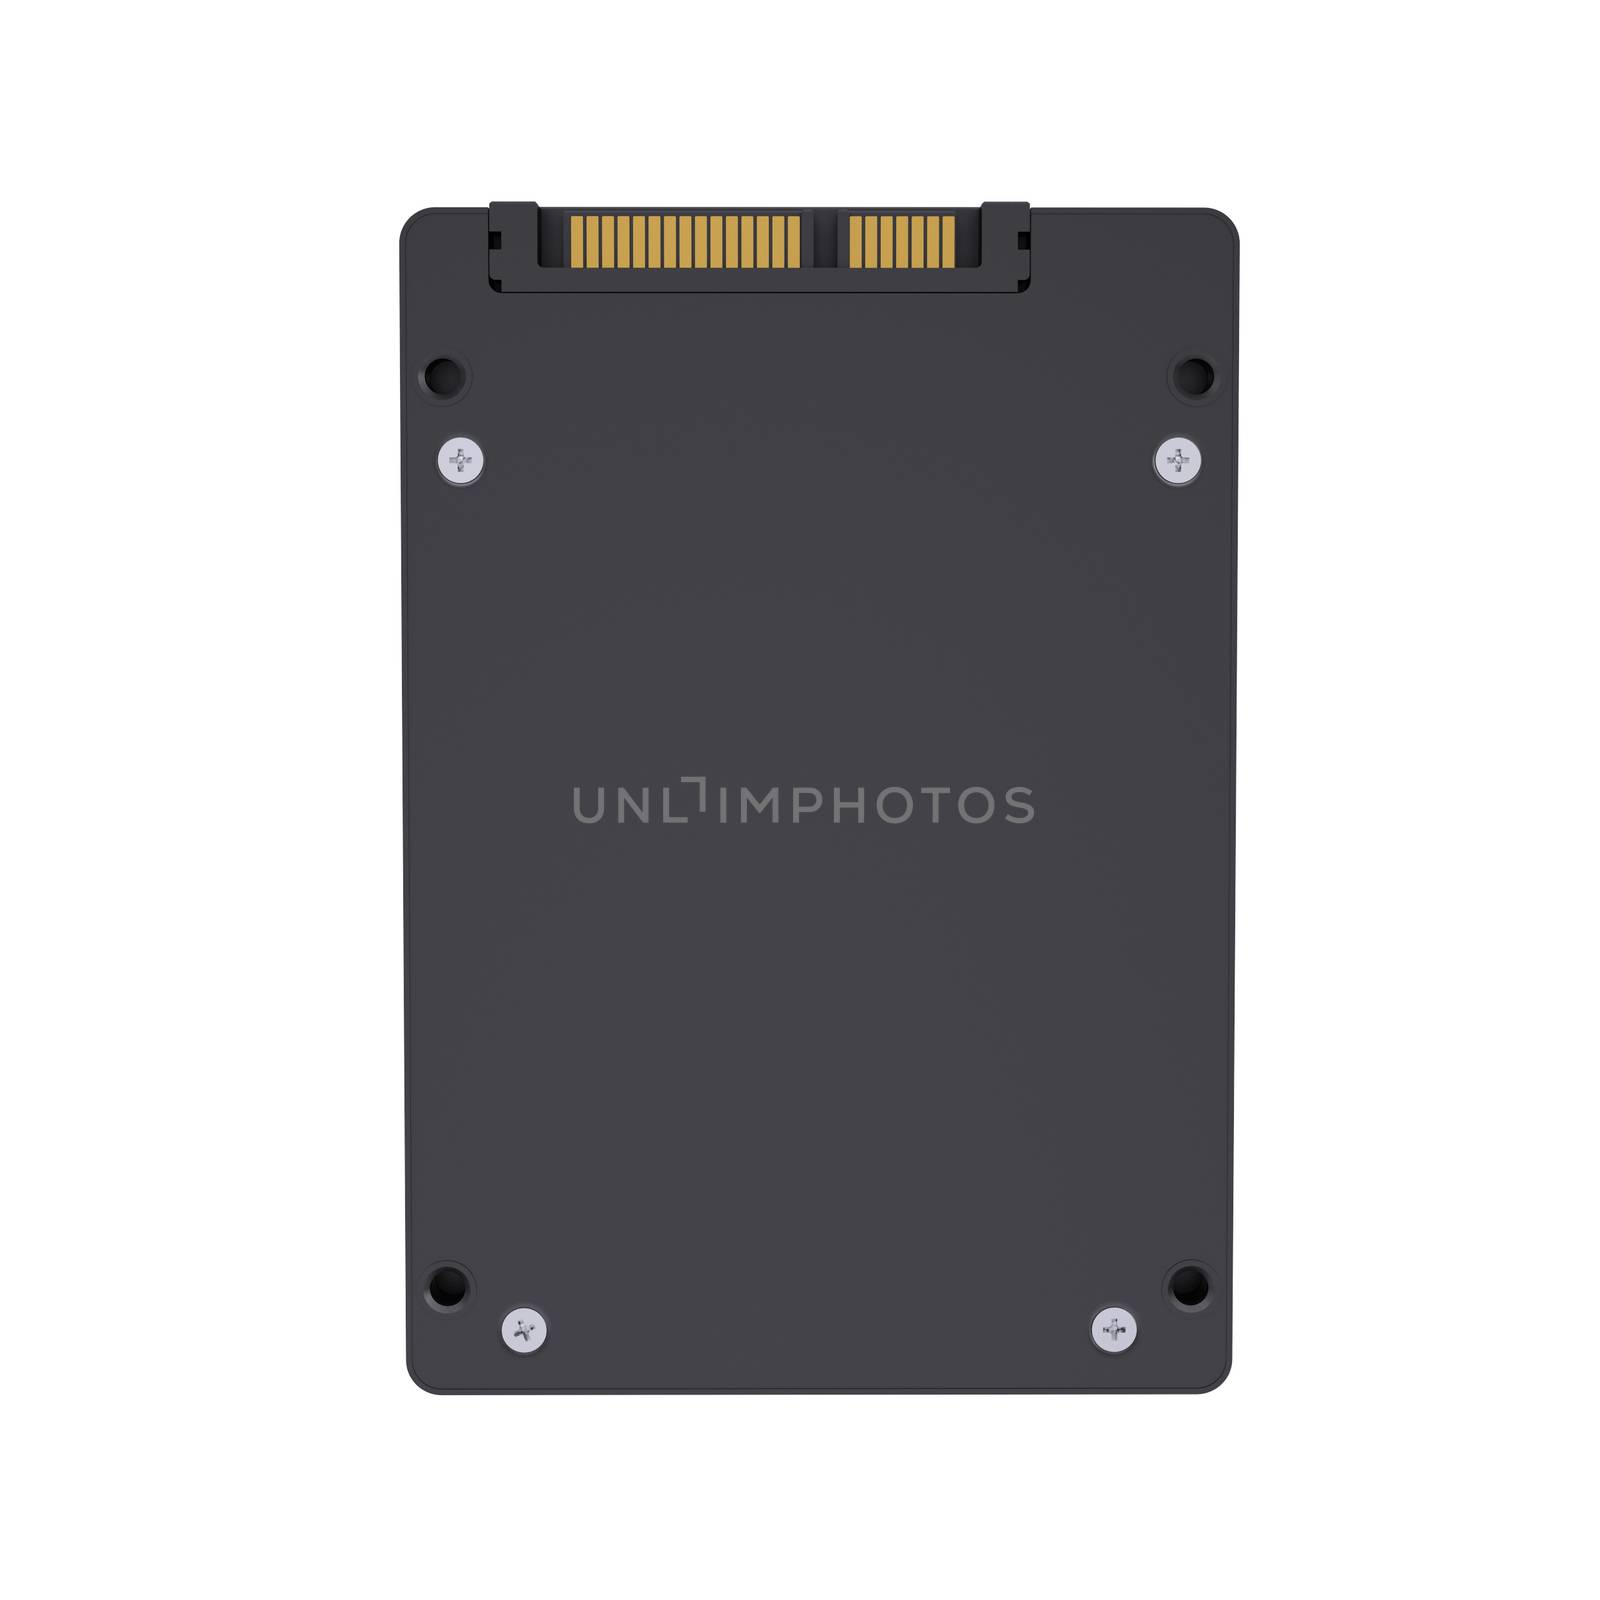 Solid-state drive by cherezoff